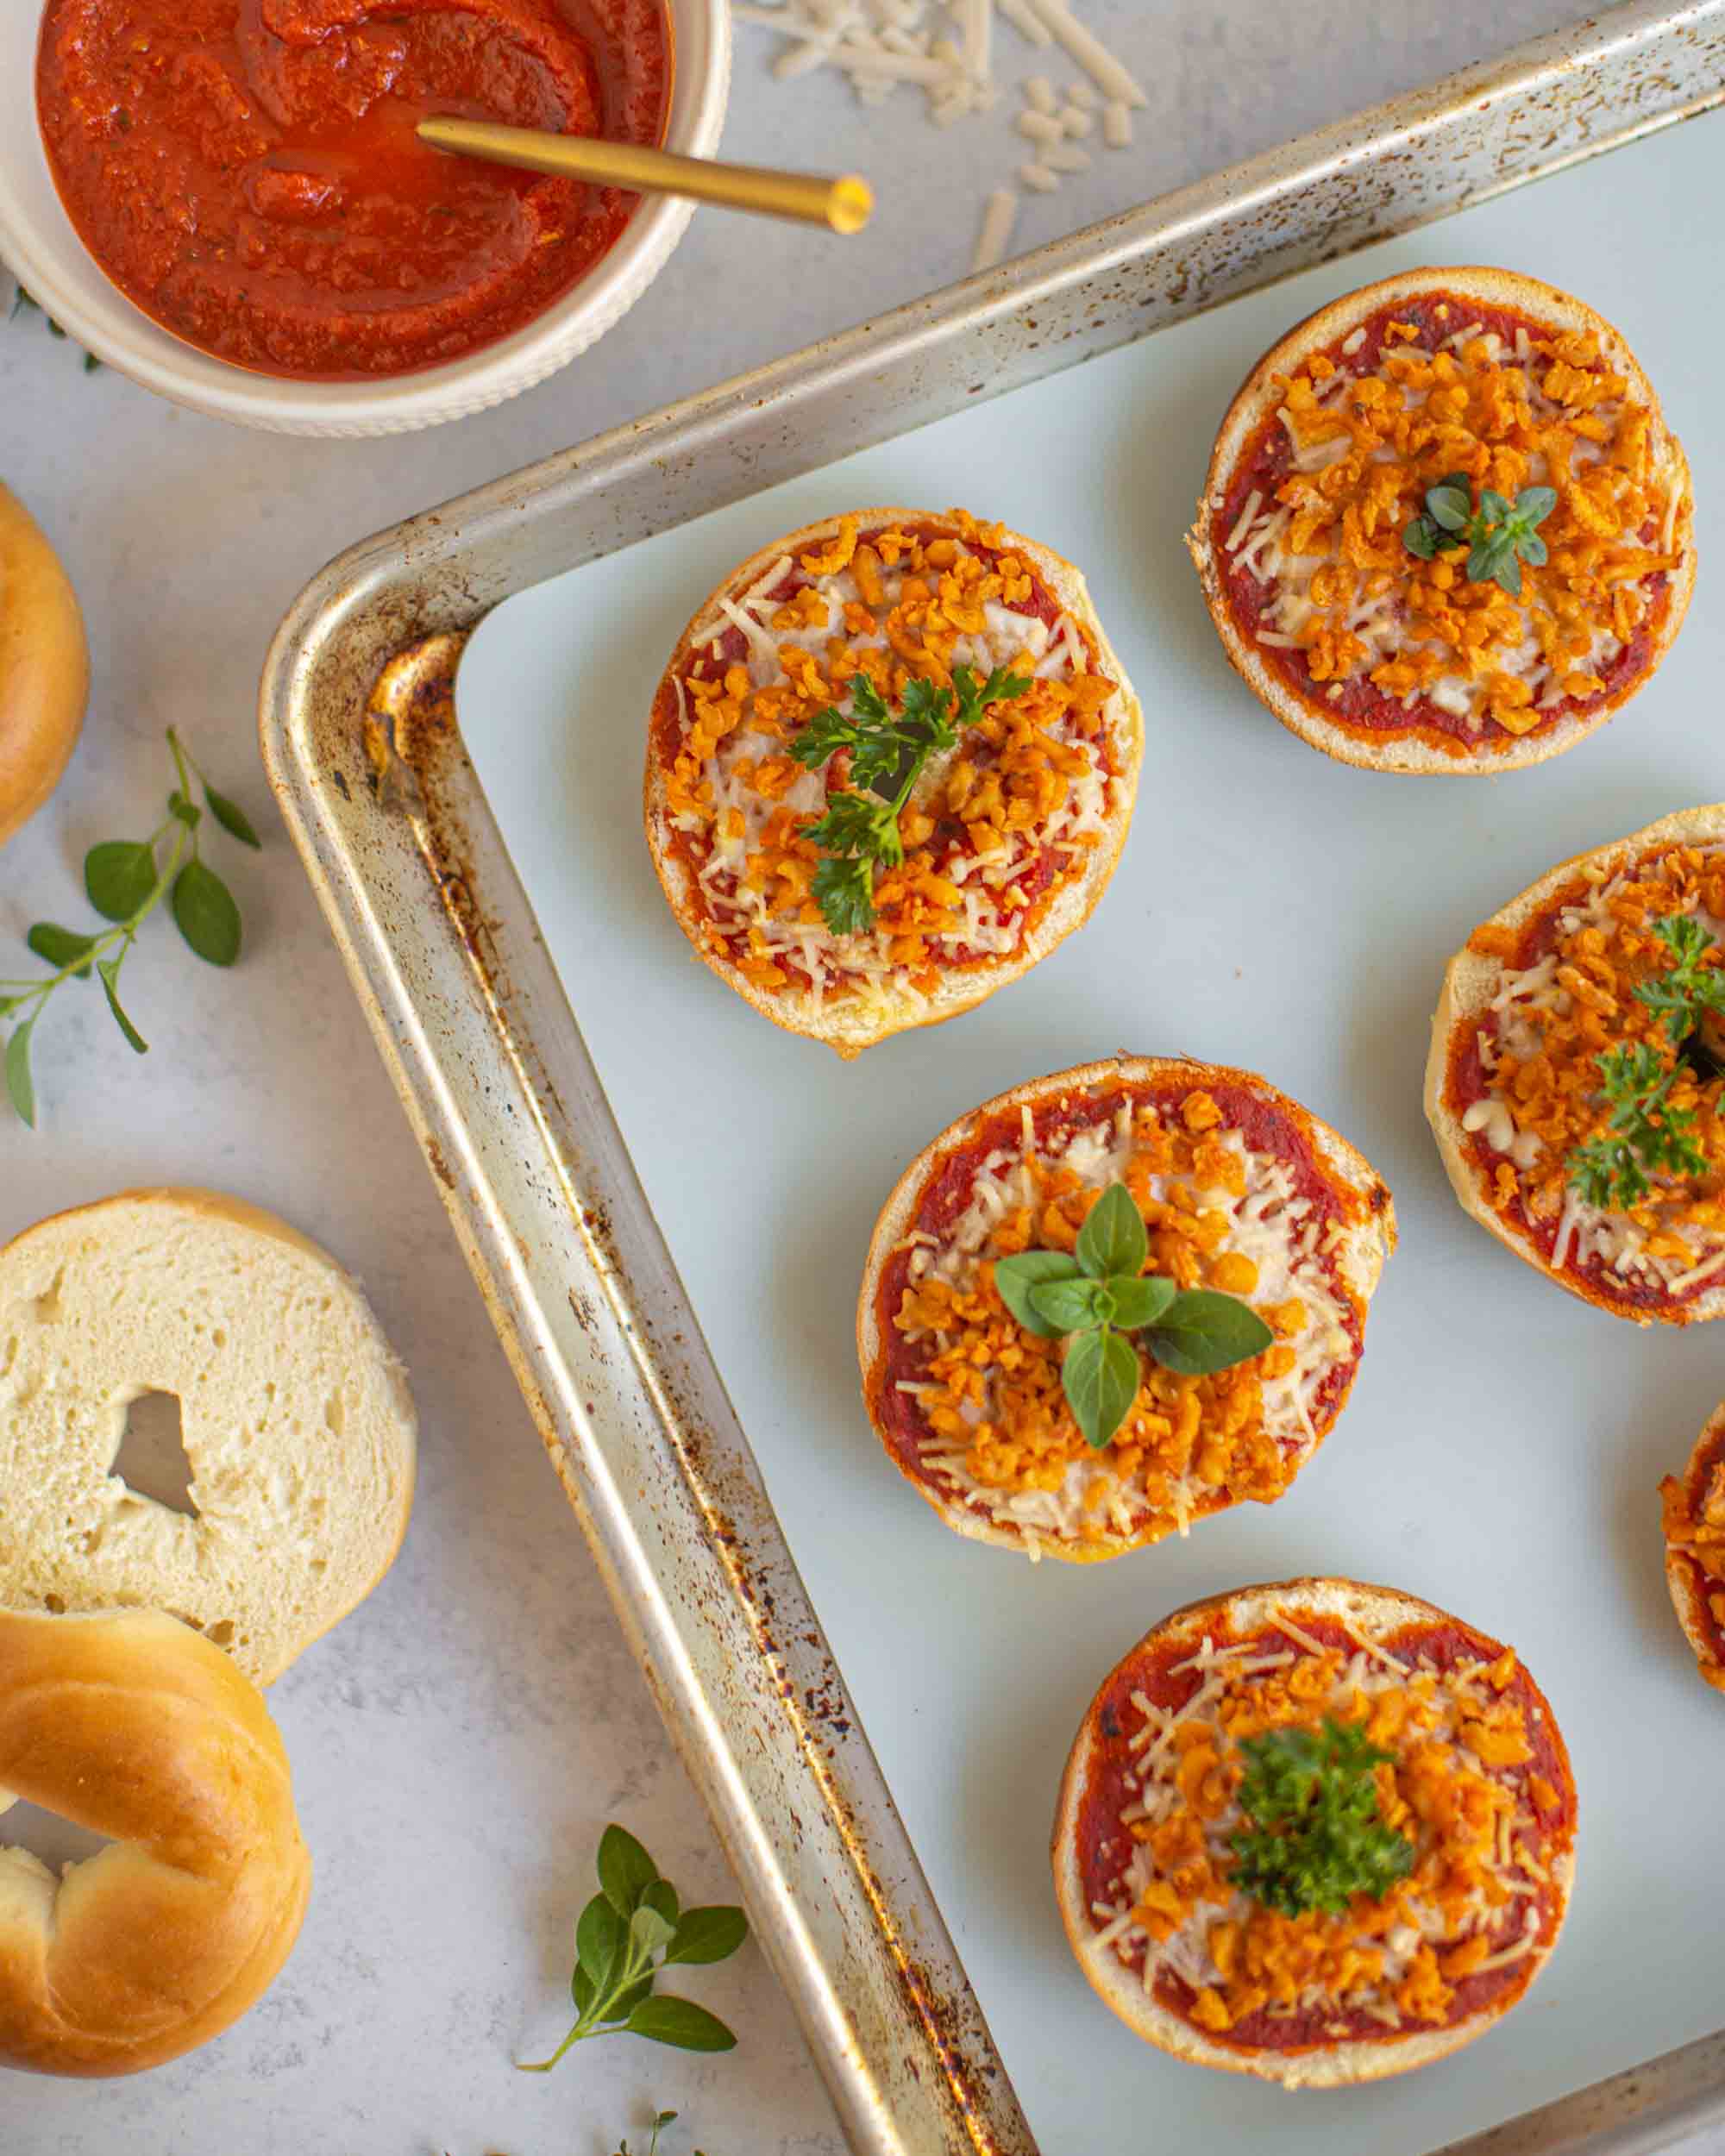 vegan pizza bagels garnished with parsley on a baking sheet. they have tomato sauce, vegan cheese, and vegan beef crumbles